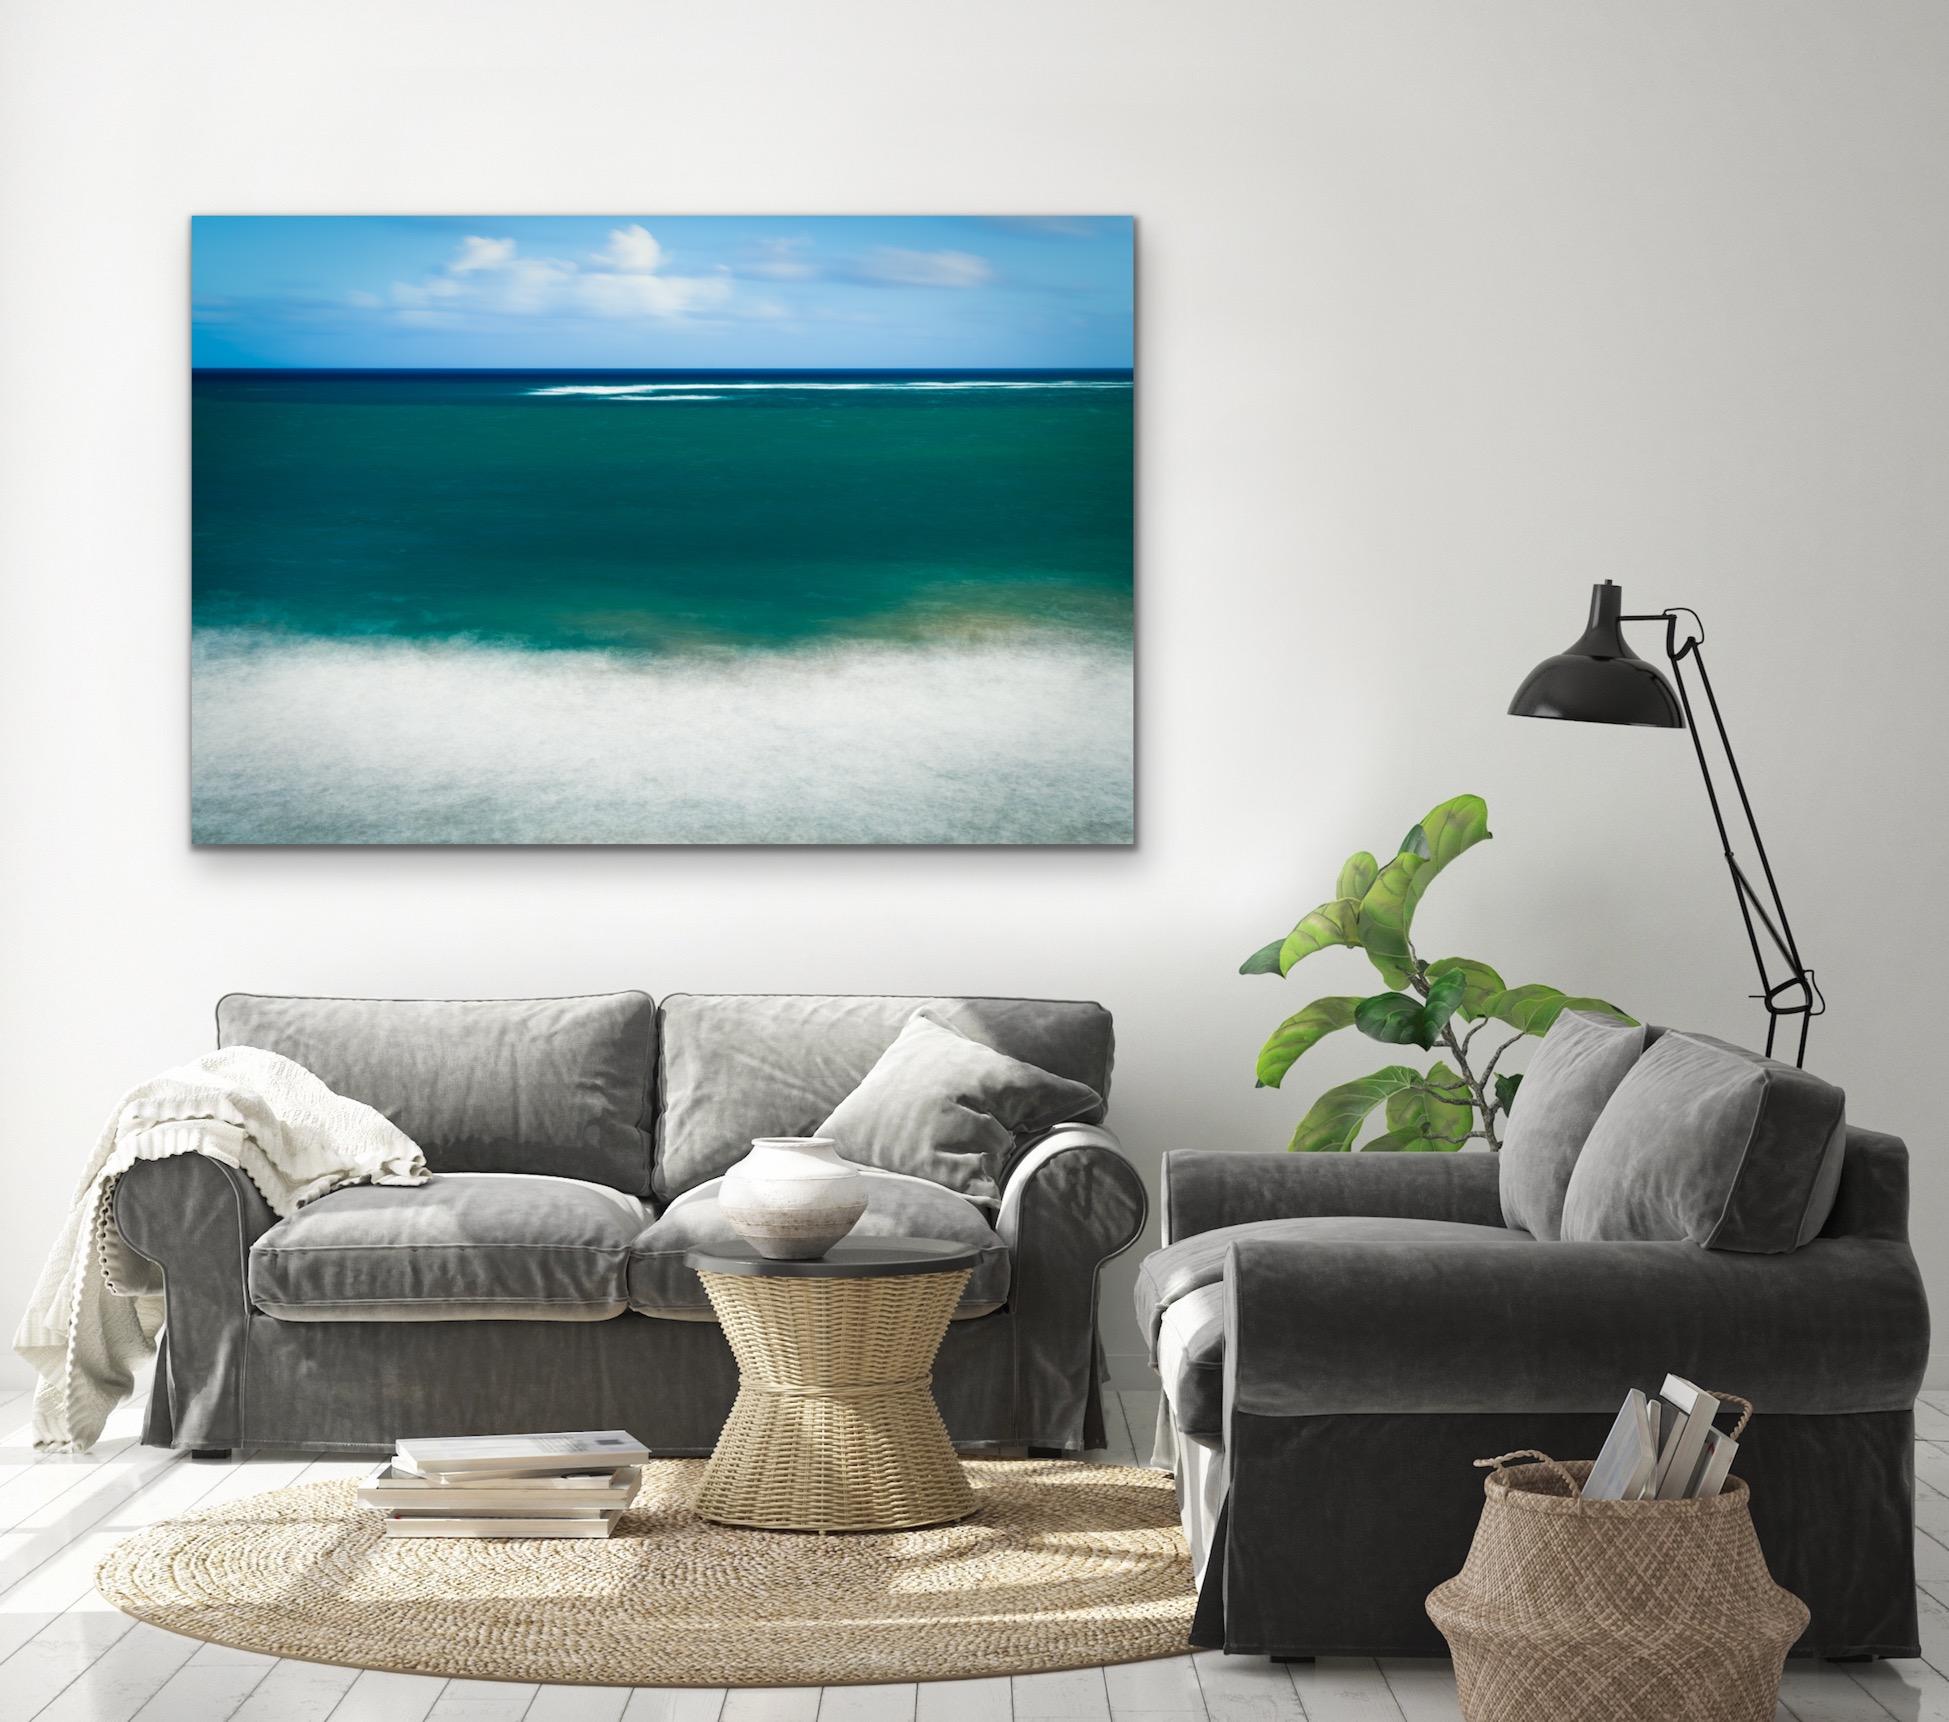 This contemporary coastal photograph by Peter Mendelson is so vibrant and idyllic, it borders on an abstract piece. White, fluffy wisps of clouds float in a bright blue sky above the horizon line of the ocean. Deep blue fades to deep teal, with